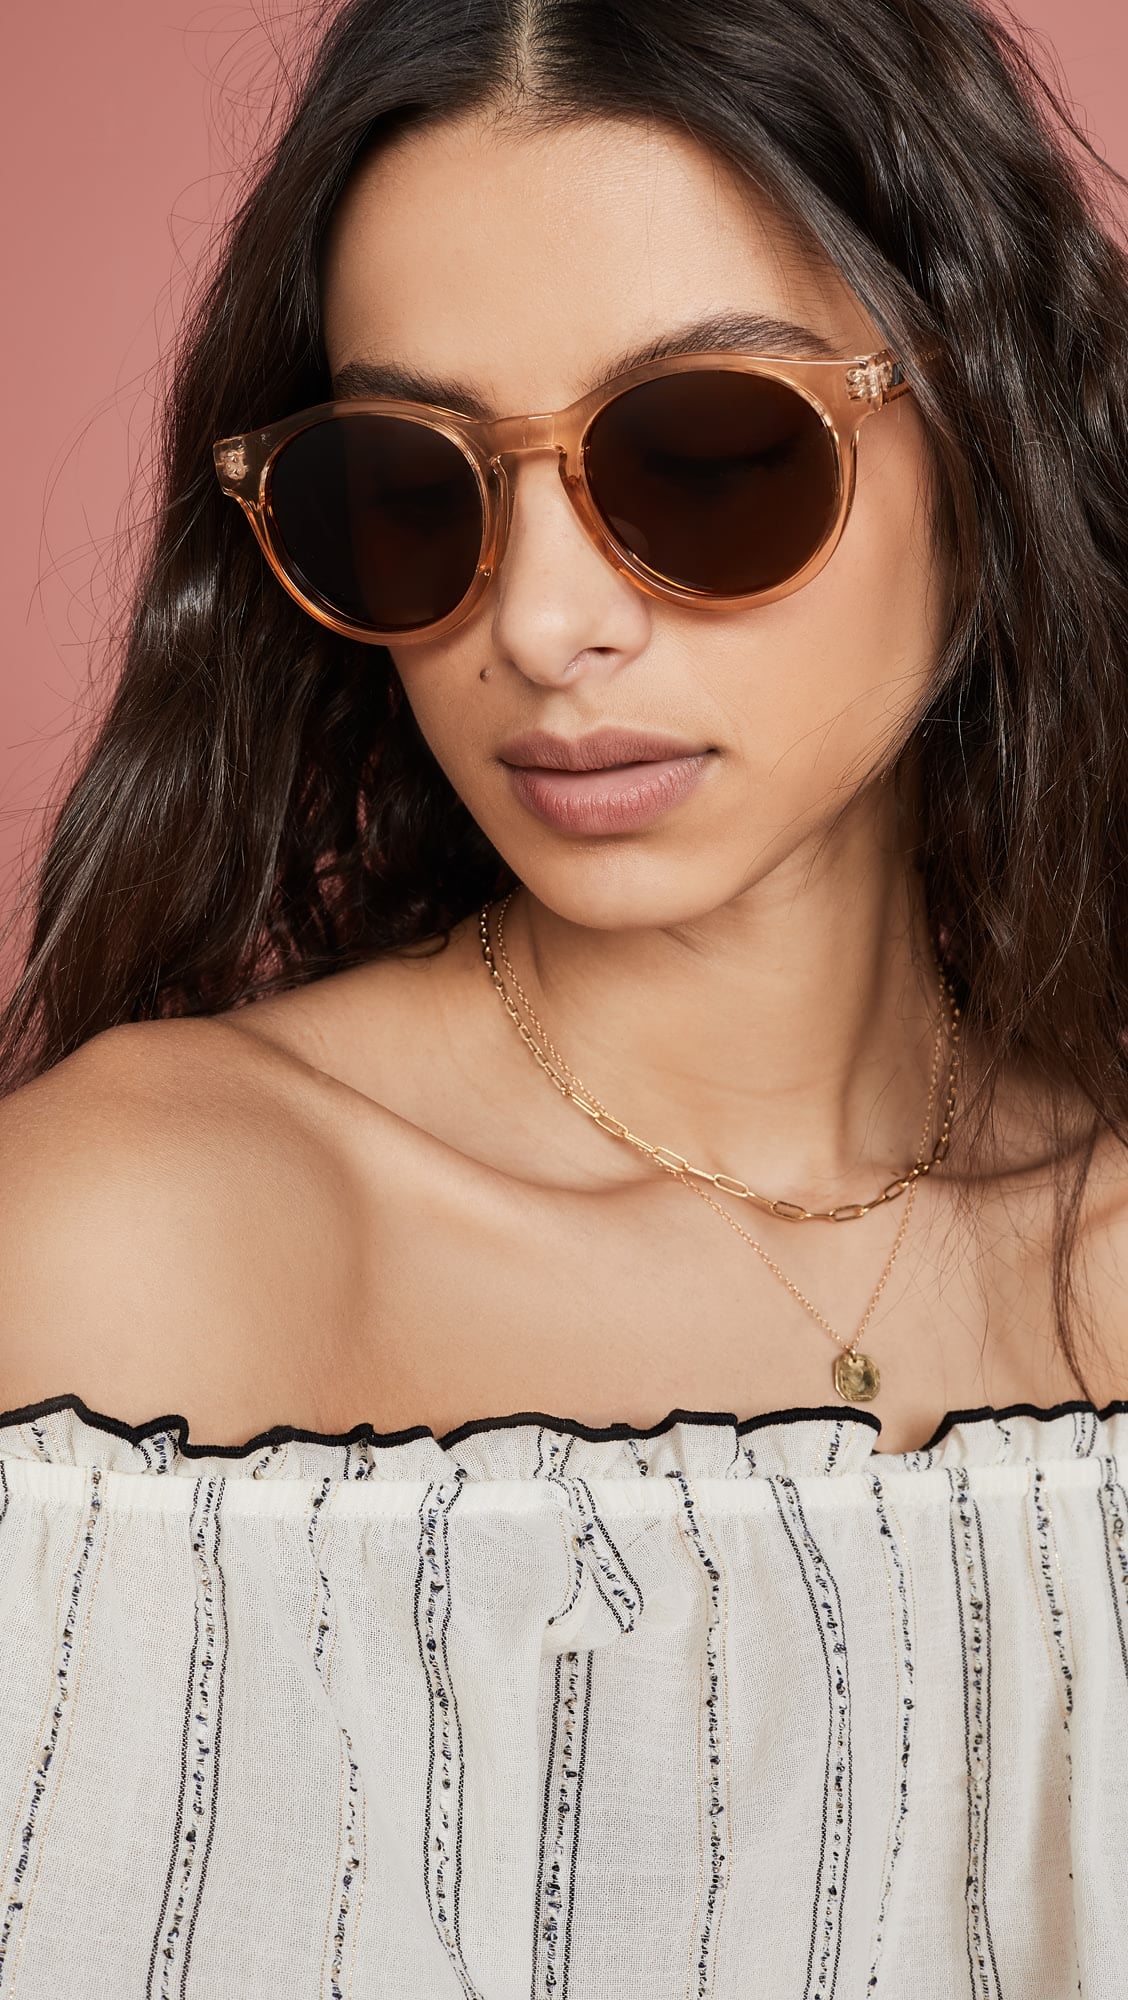 Women's Sunglasses: The most useful and fashionable accessory